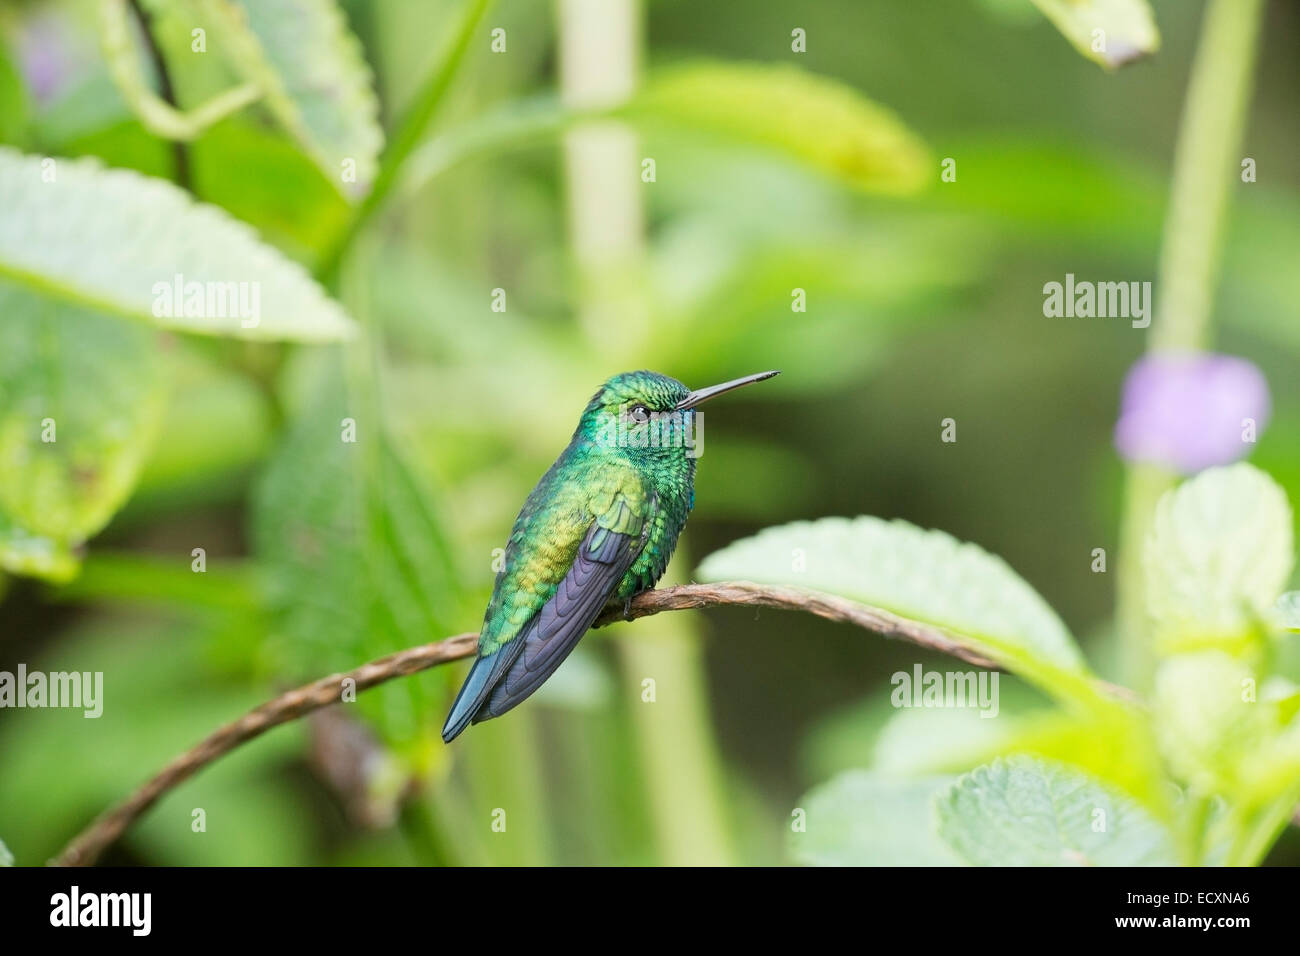 blue-chinned sapphire hummingbird (Chlorestes notatus) single adult male perched on vegetation. Stock Photo